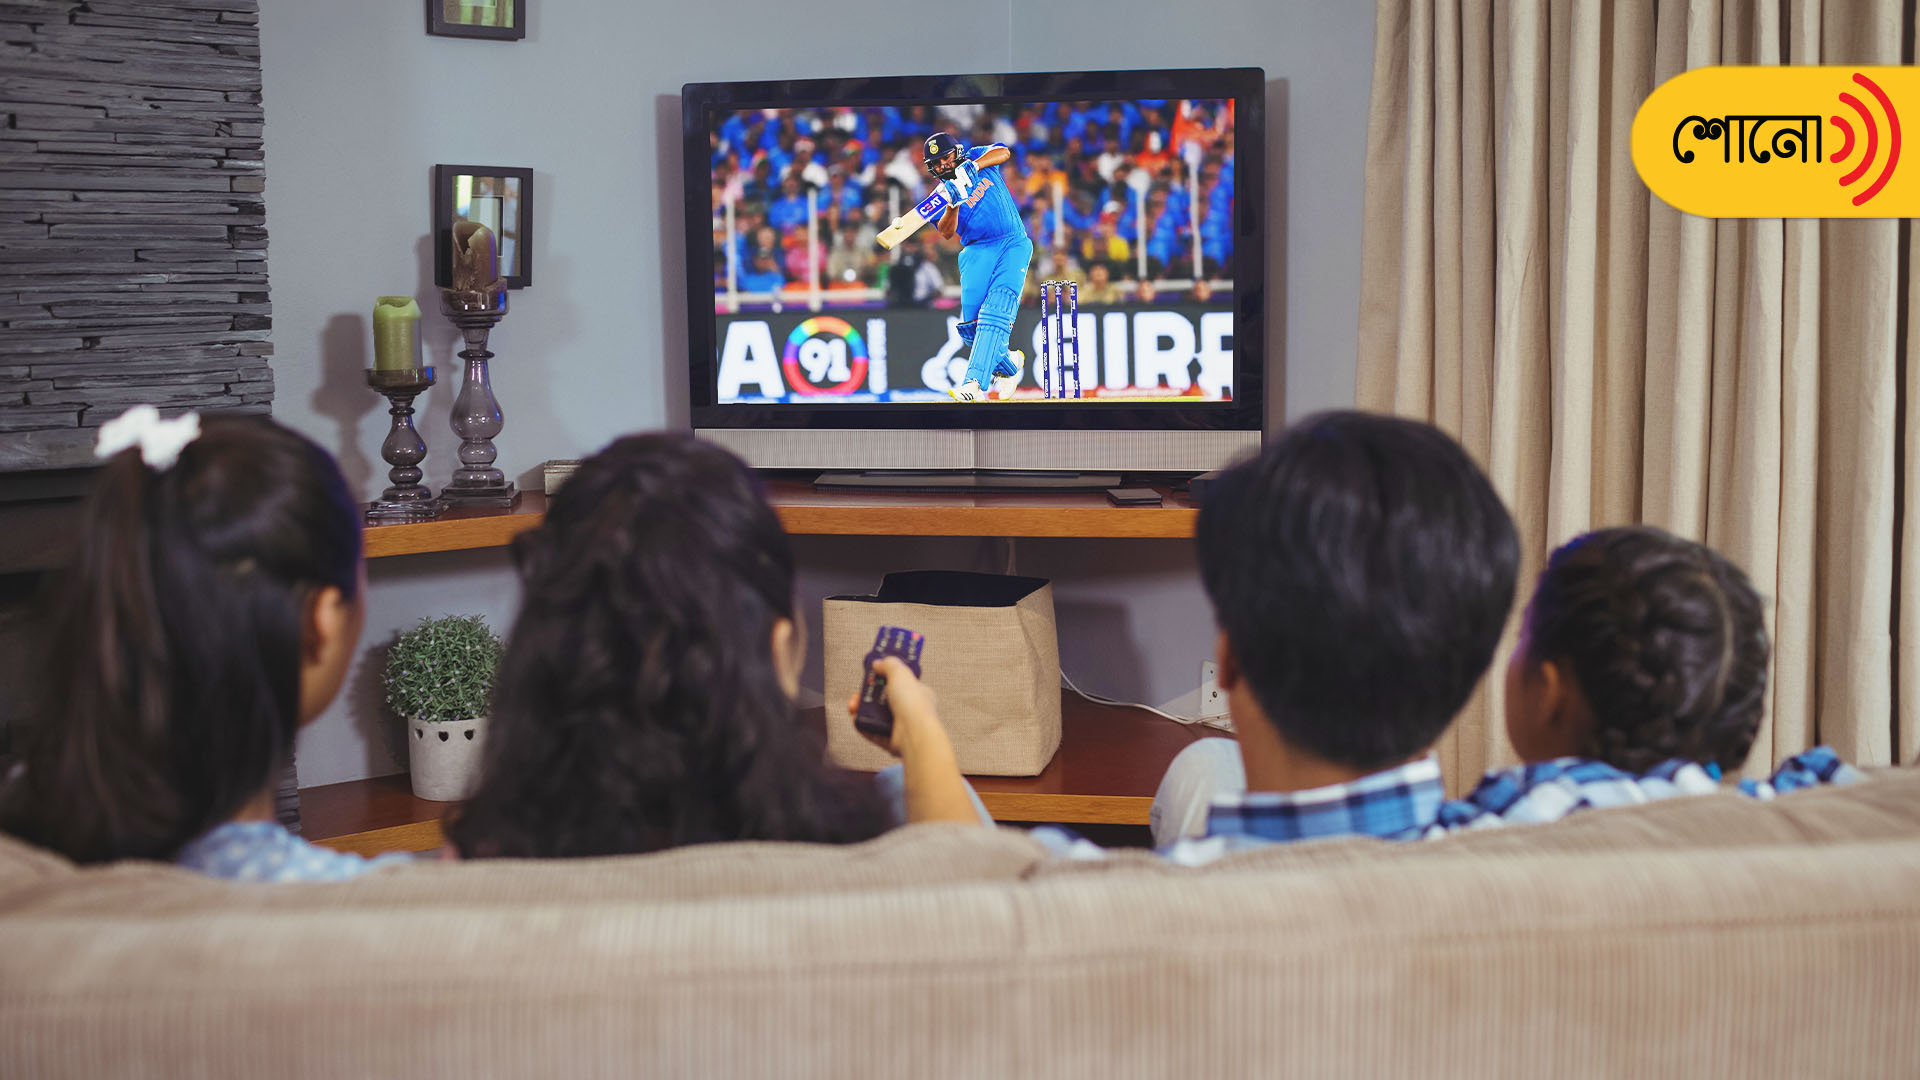 what to keep in mind while watch World Cup match on TV